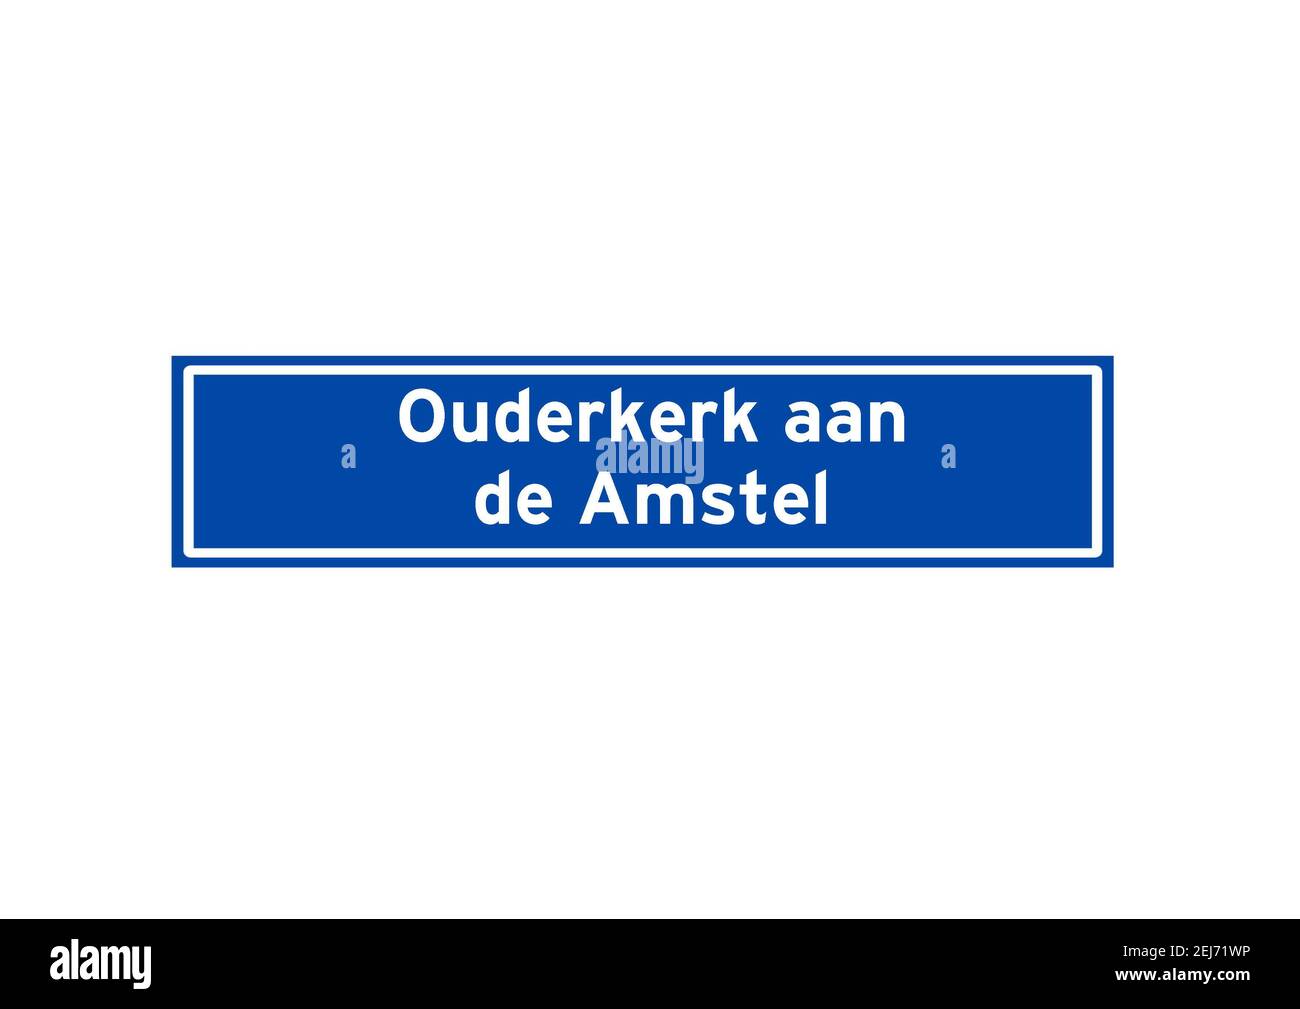 Ouderkerk aan de Amstel isolated Dutch place name sign. City sign from the Netherlands. Stock Photo